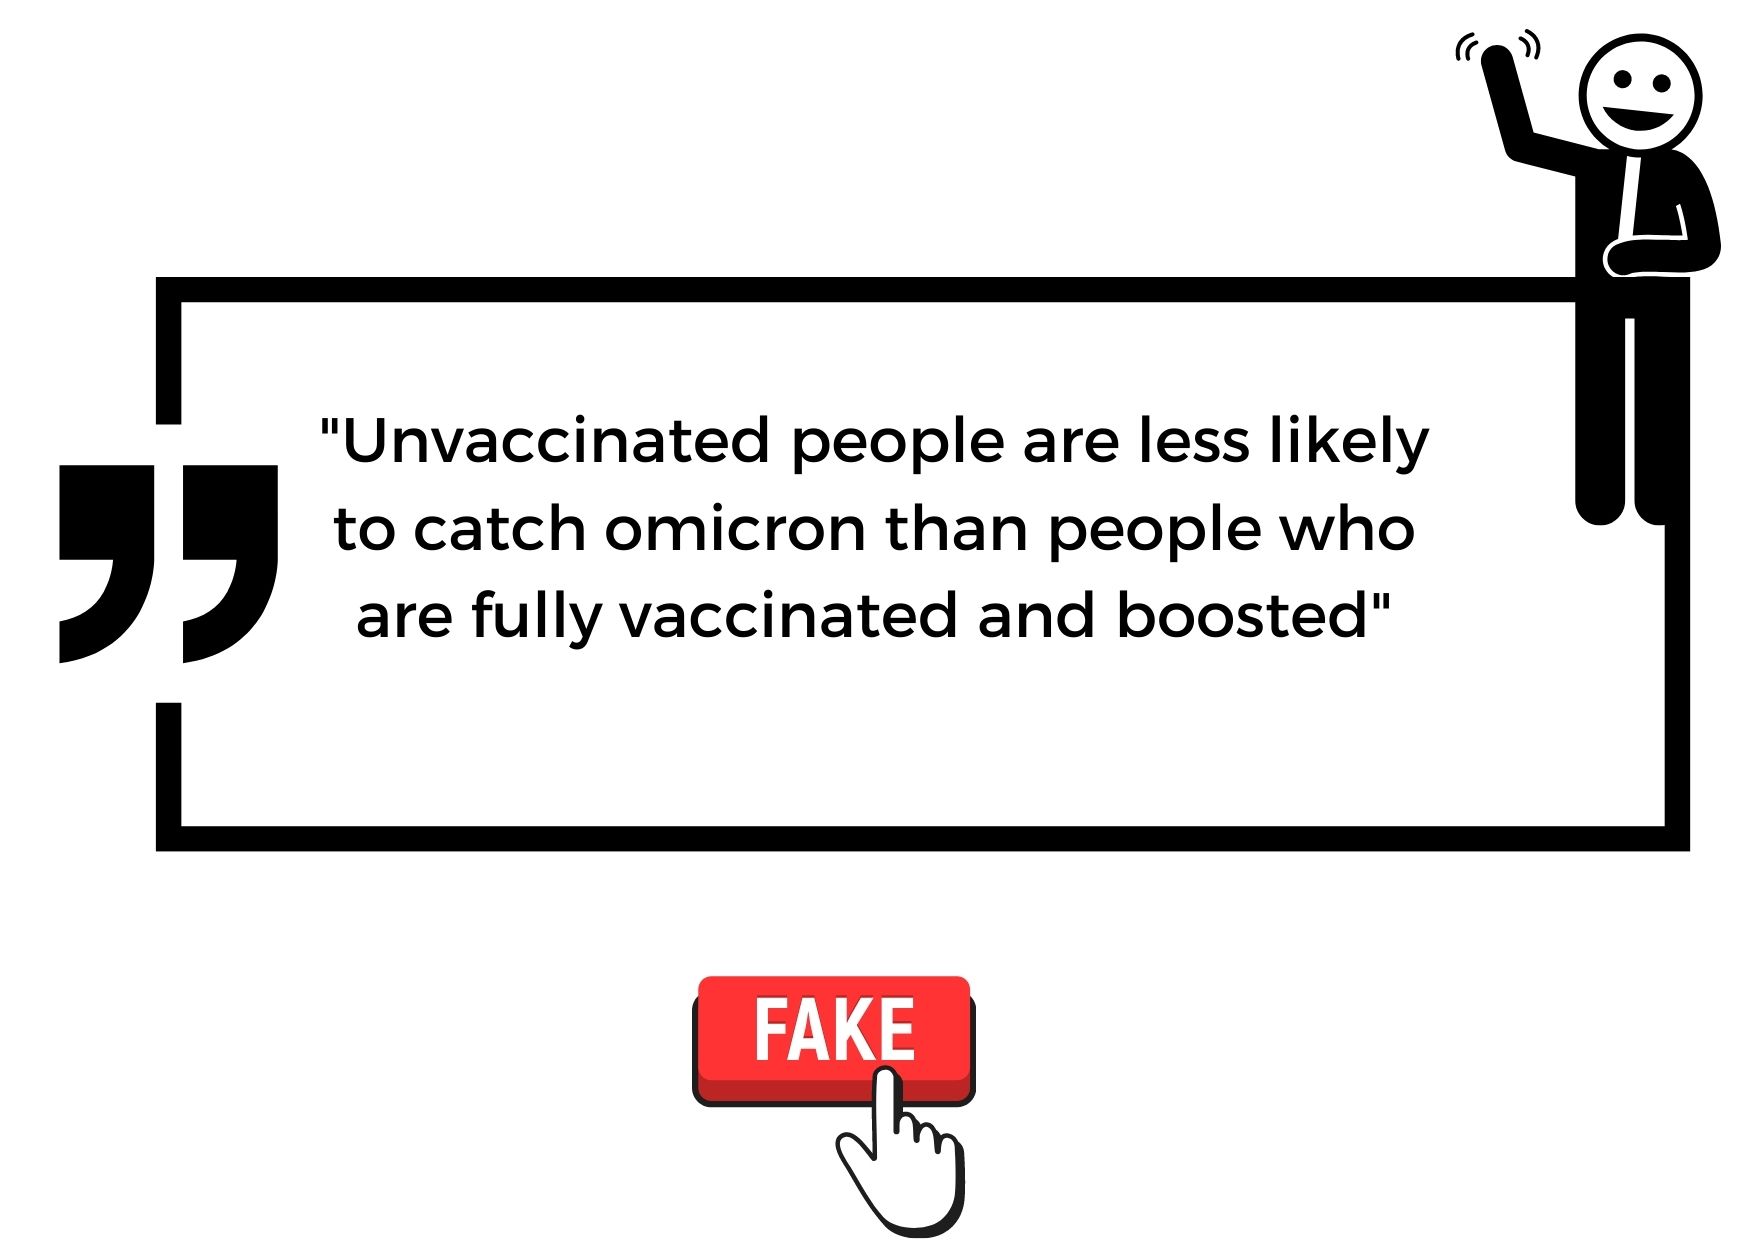 False: Unvaccinated People Are Less Likely To Catch Omicron Than Fully Vaccinated And Boosted